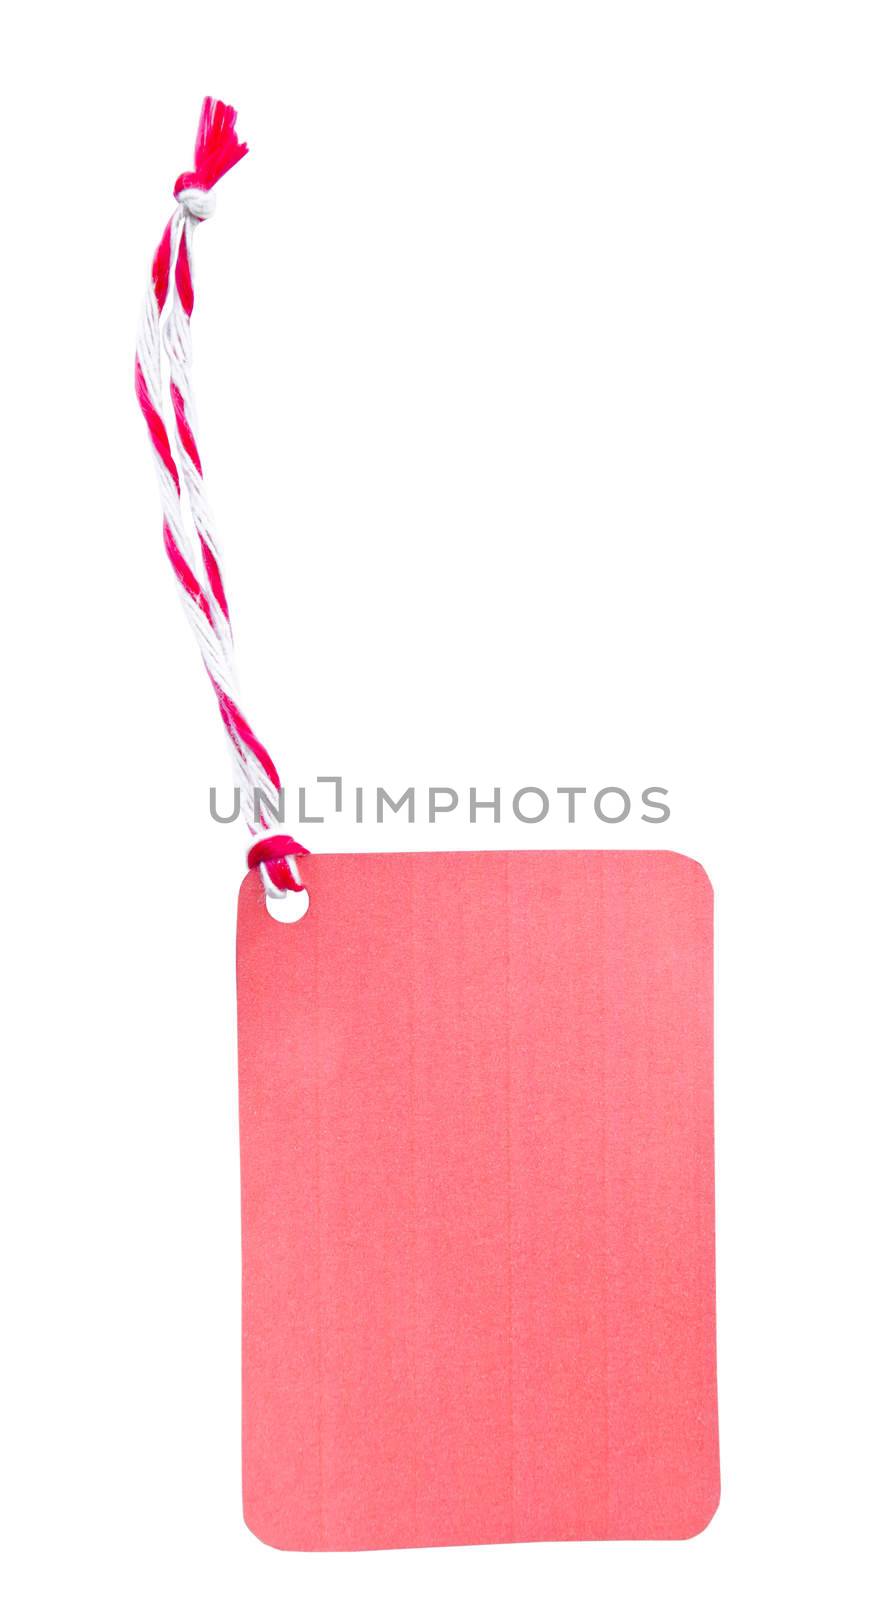 Blank tag isolated on white background by Gamjai